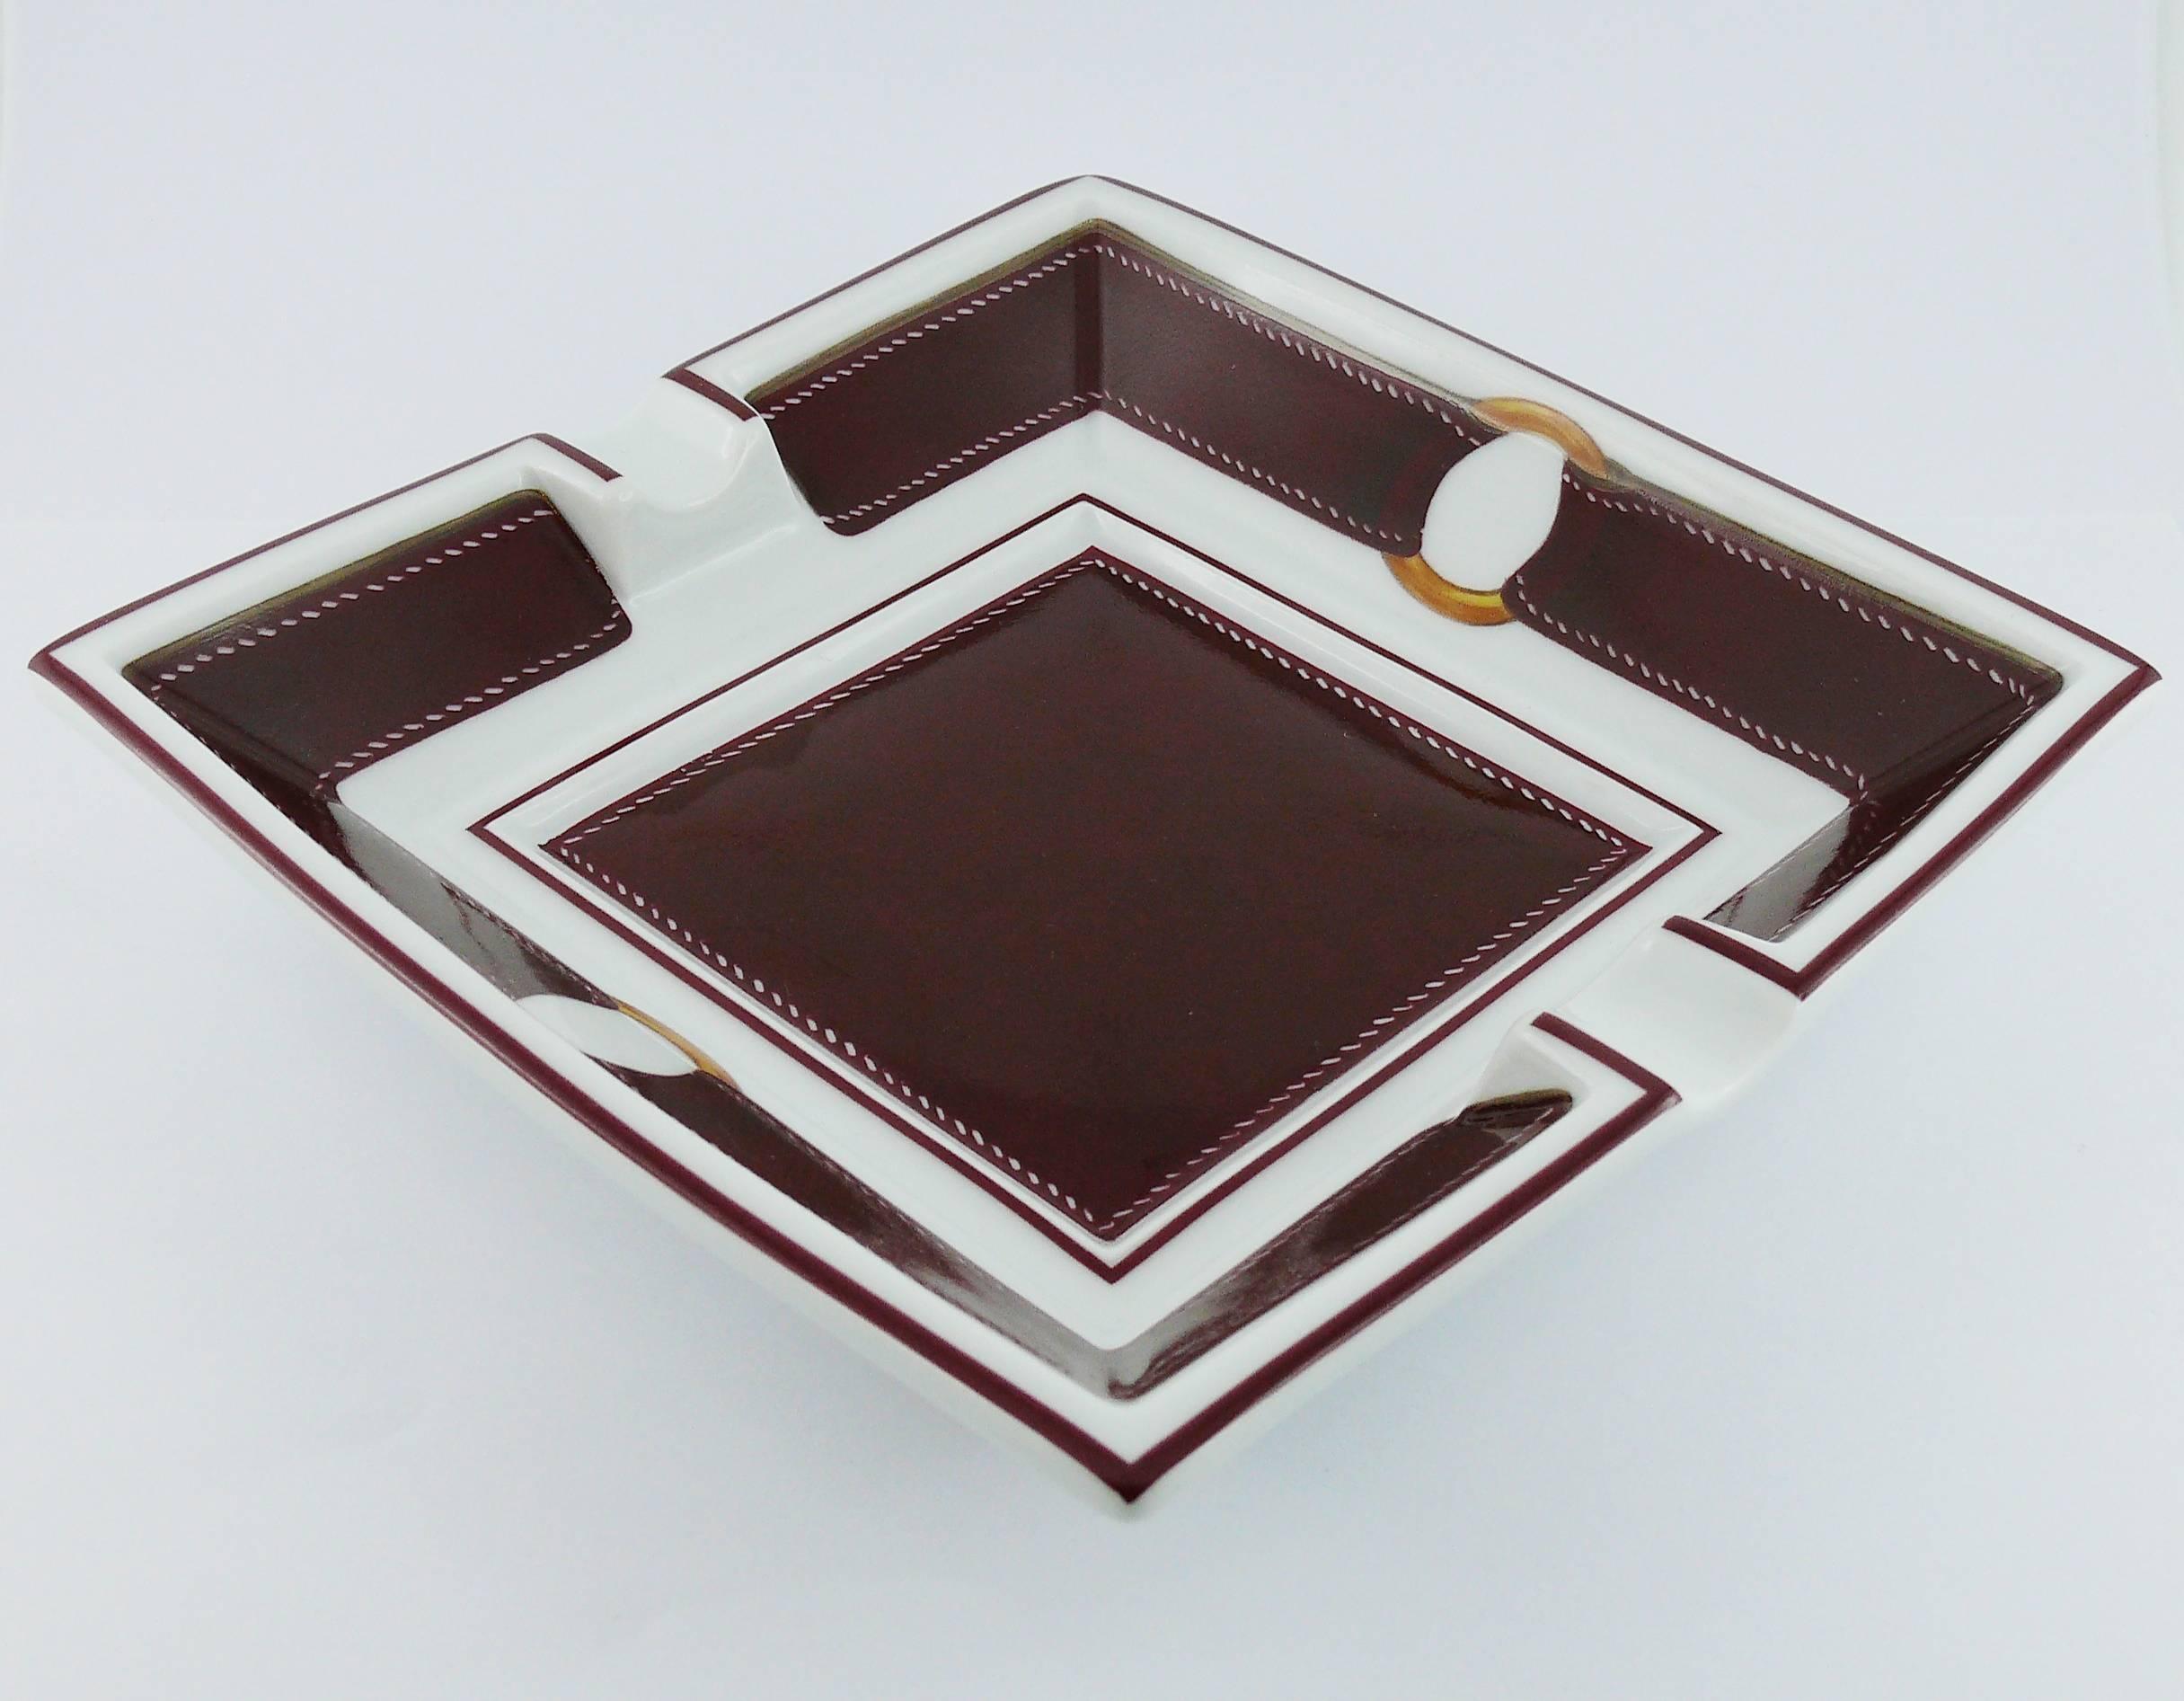 HERMES gorgeous square porcelain ashtray/pin tray featuring a burgundy leather with saddle stitching trompe-l'oeil design.

Marked HERMES Made in France.

Indicative measurements : length approx. 15.8 cm (6.22 inches) / width approx. 15.8 cm